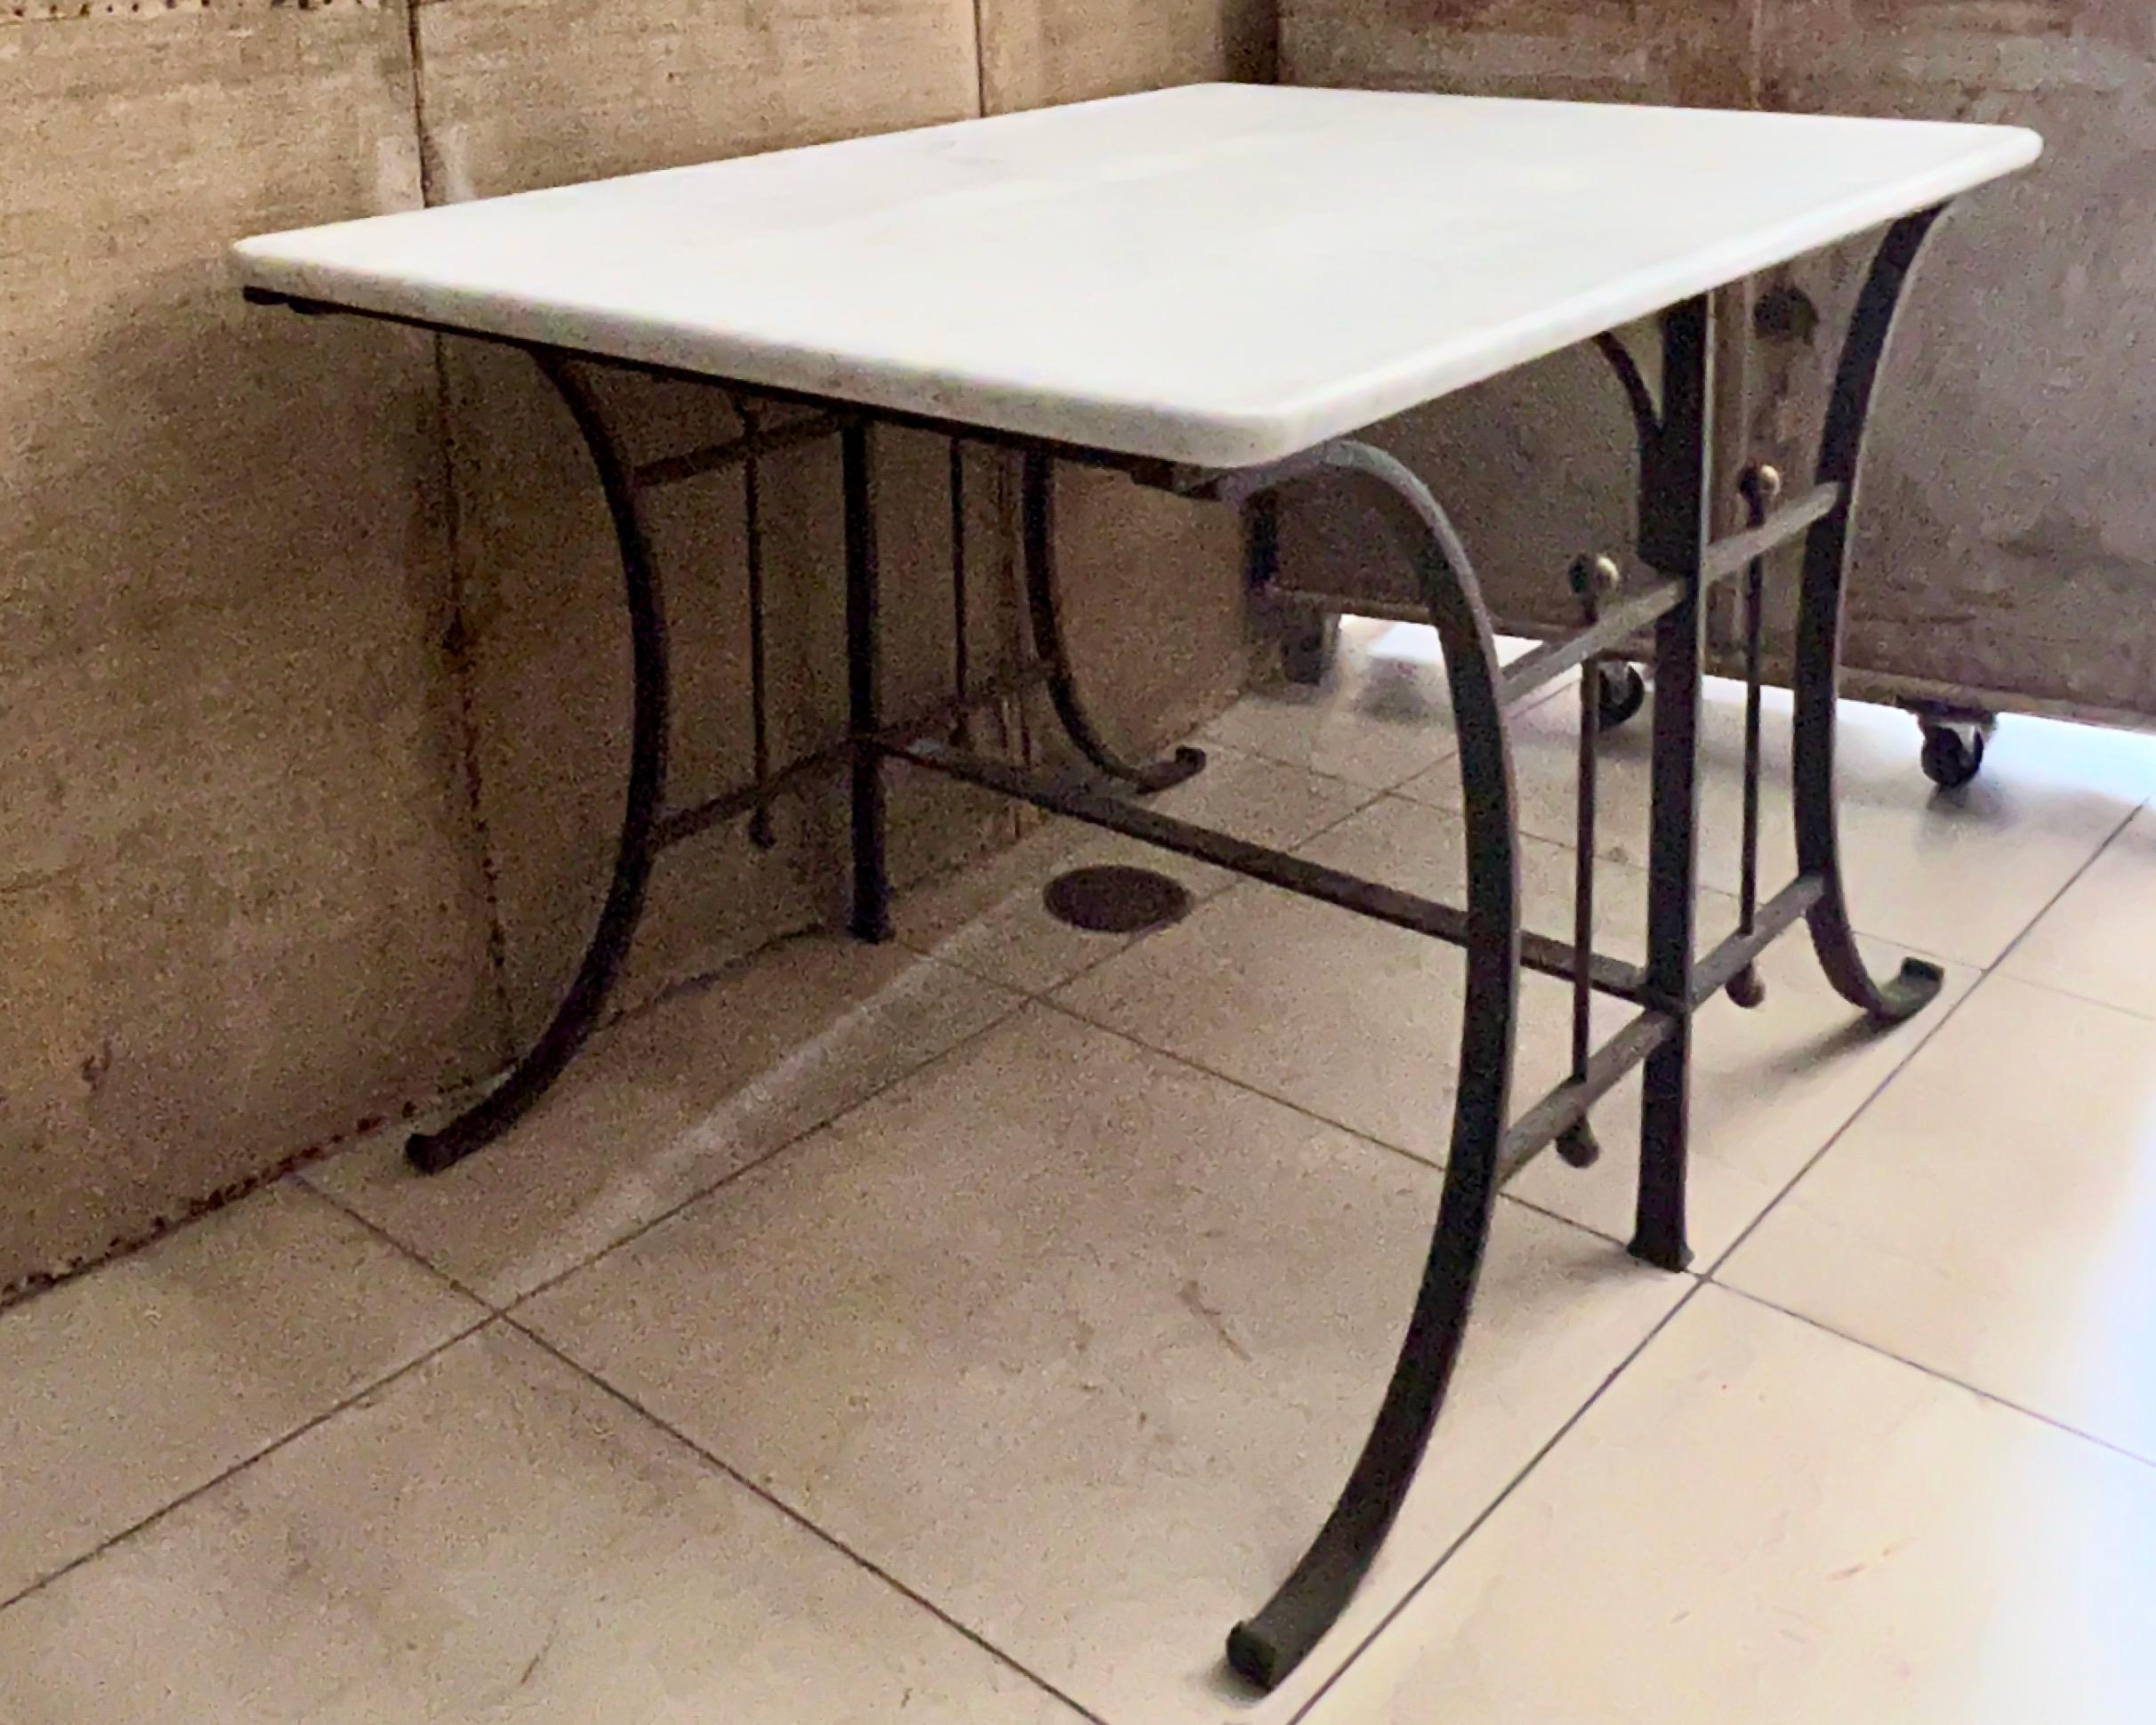 19th century French pastry, console, center table in clean line heavy iron base with recent white thick Carrara marble top with light grey veining.
The tables like these have been used as display table in the French Patisseries or Butcher shops.
 